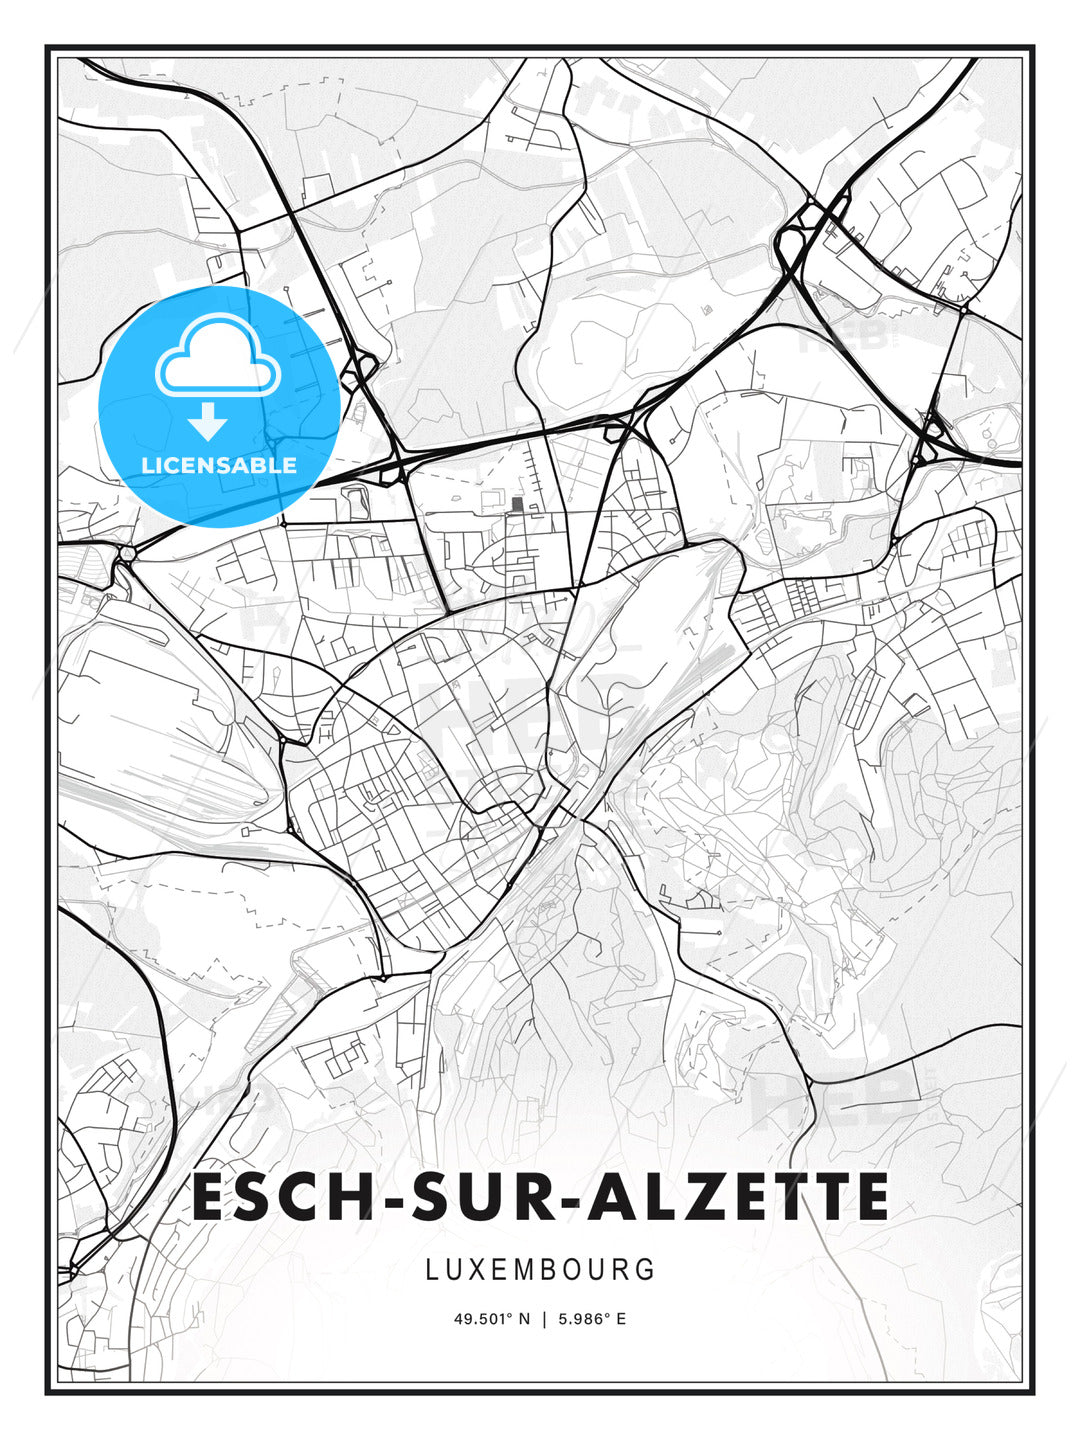 Esch-sur-Alzette, Luxembourg, Modern Print Template in Various Formats - HEBSTREITS Sketches